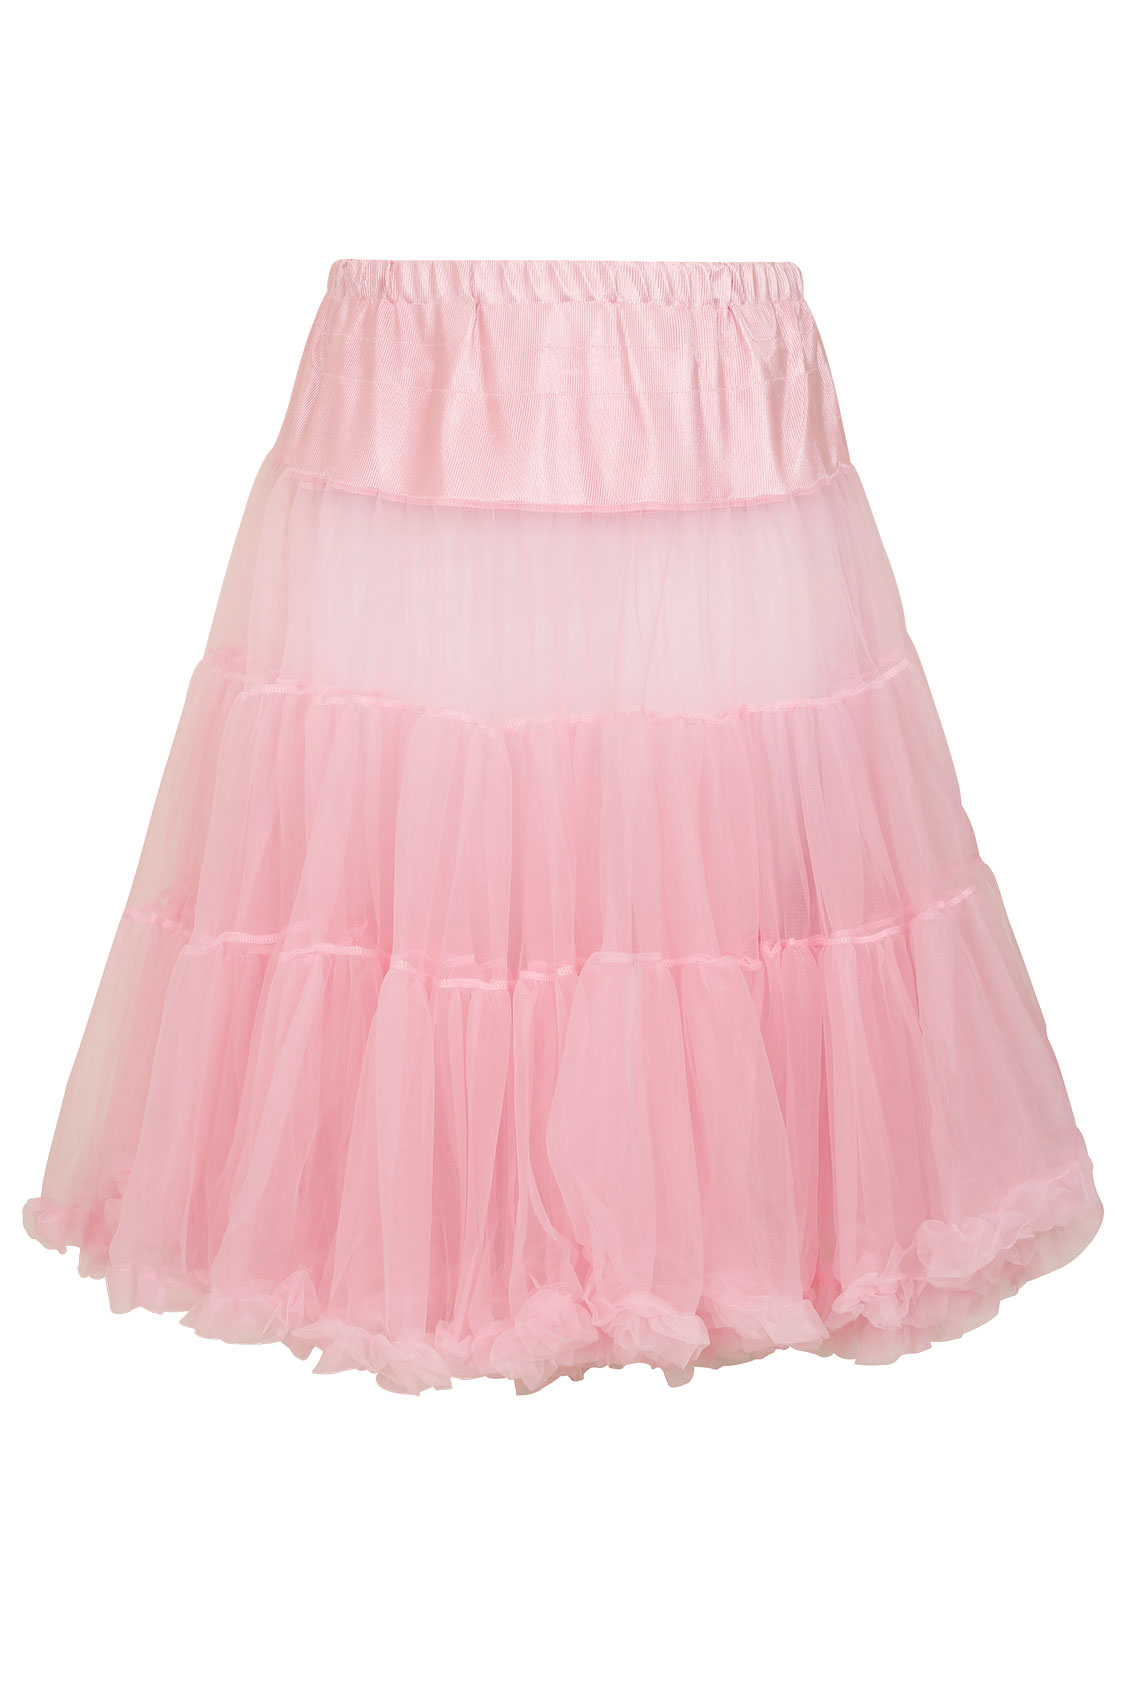 HELL BUNNY Dolly Pink Petticoat Flare Skirt, Plus size 16 to 32